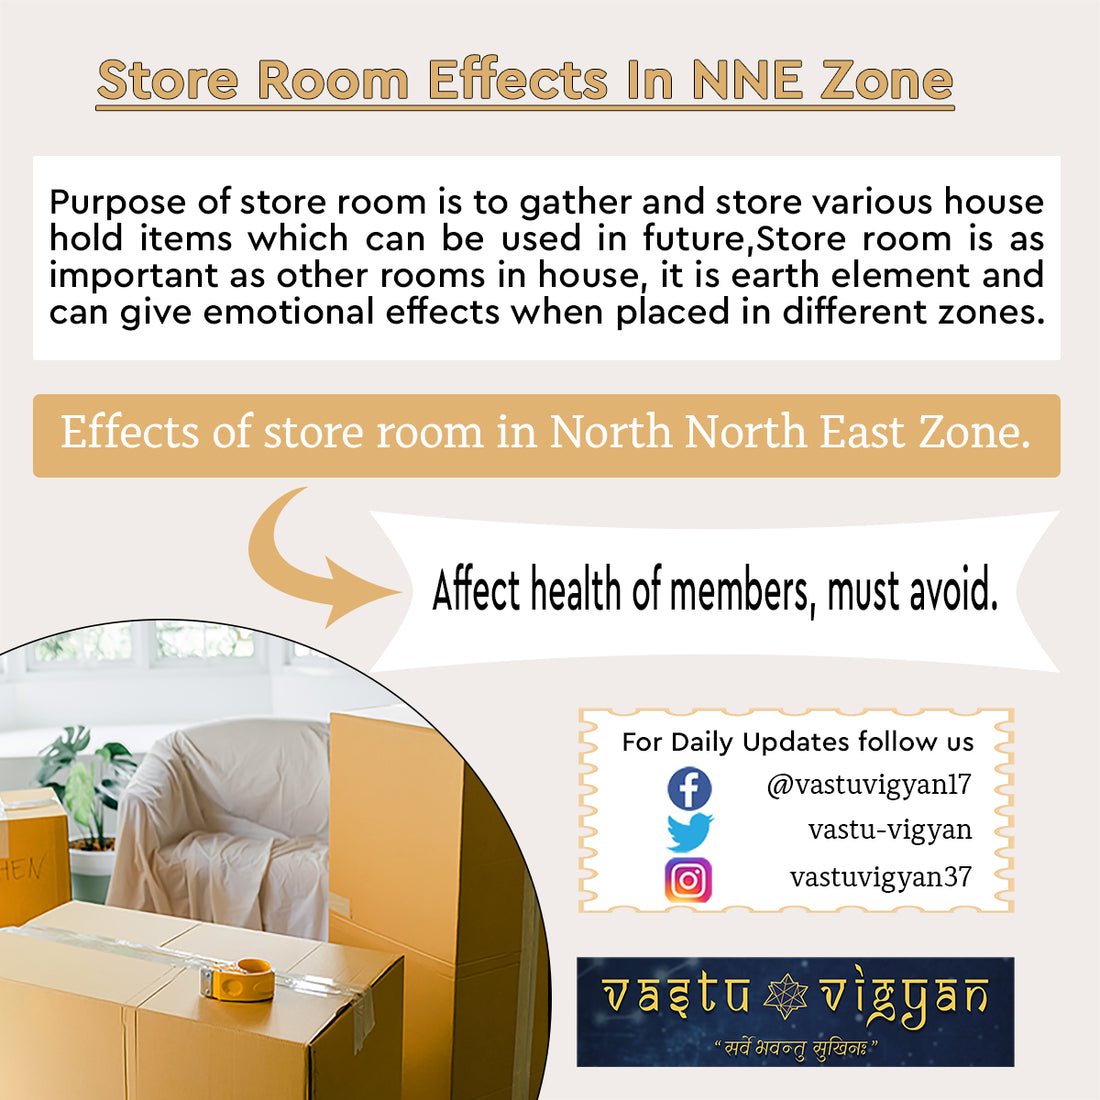 Store Room Effects in North North East Zone